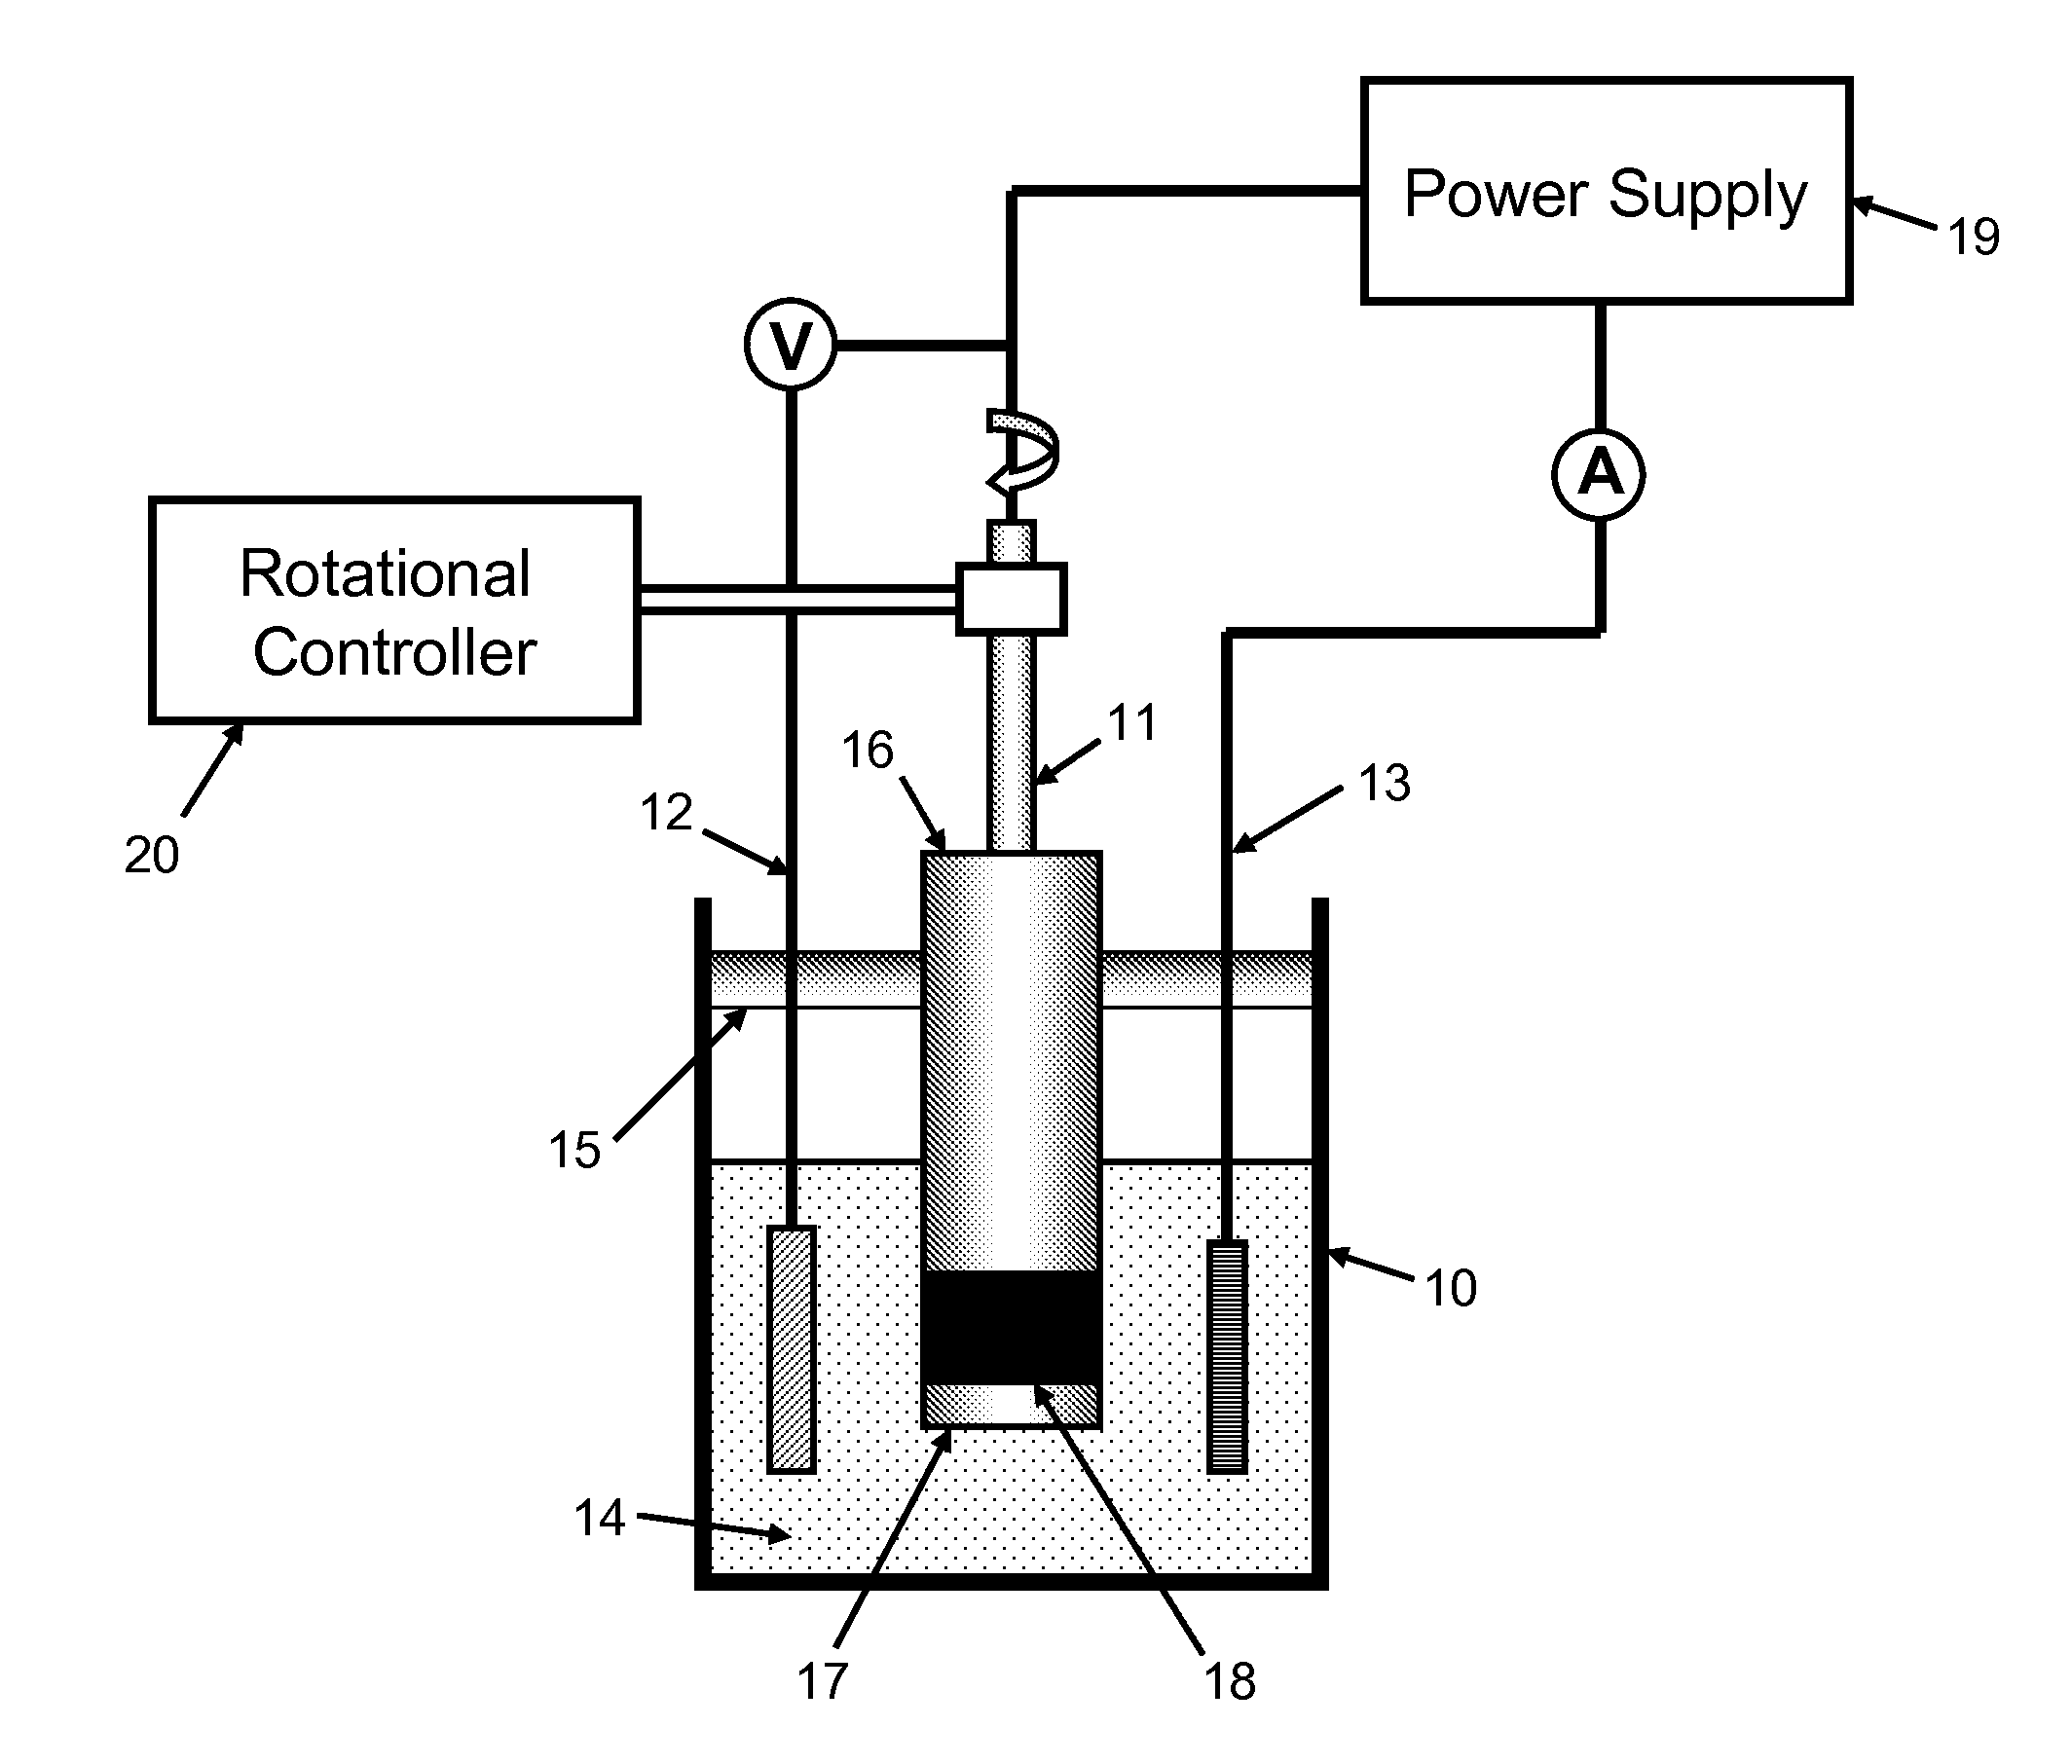 Apparatus and method for the synthesis and treatment of metal monolayer electrocatalyst particles in batch or continuous fashion